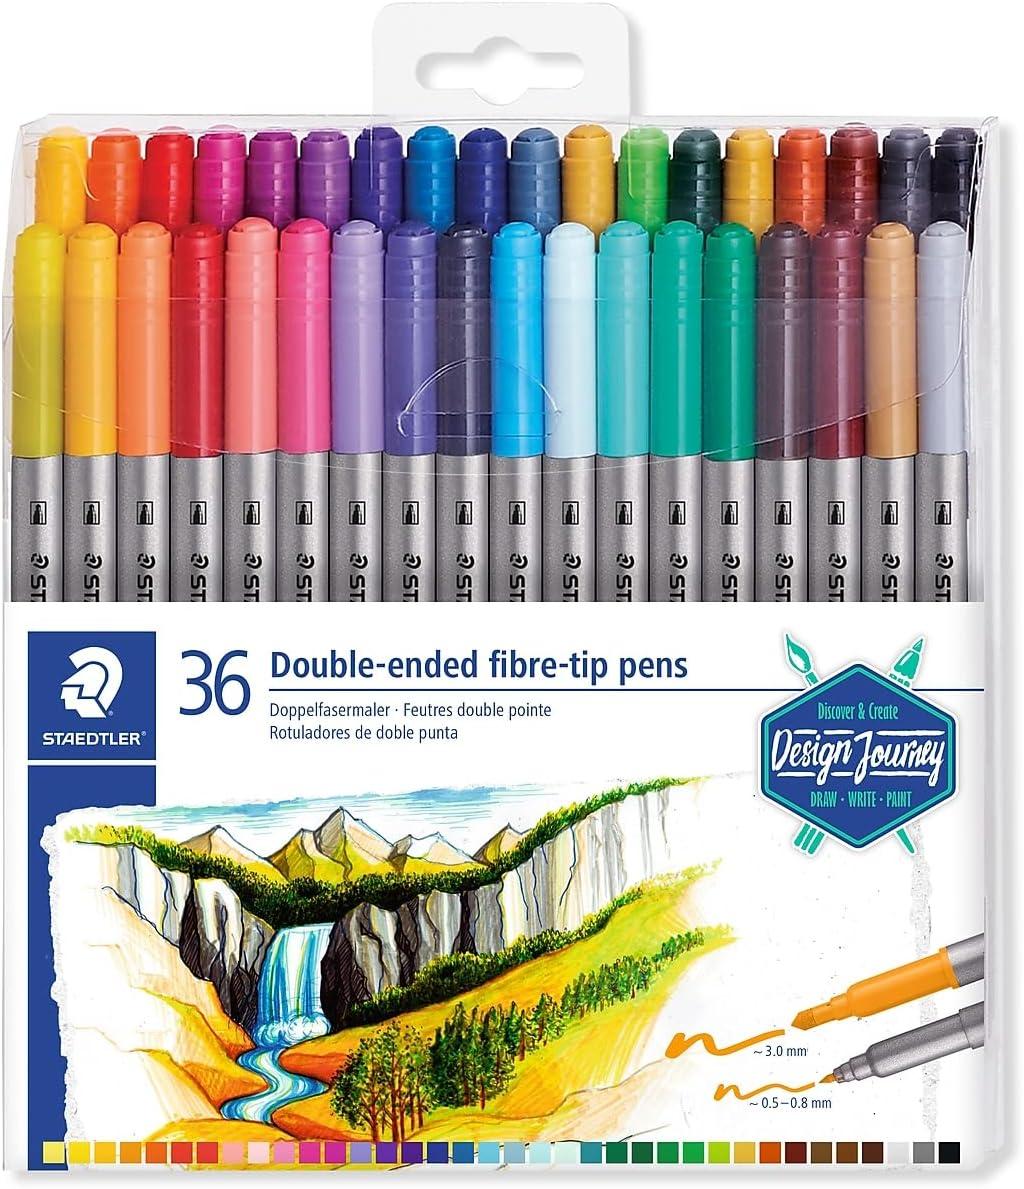 staedtler double-ended fiber-tip pens washable ink fine and bold writing and coloring tips 36 assorted colors